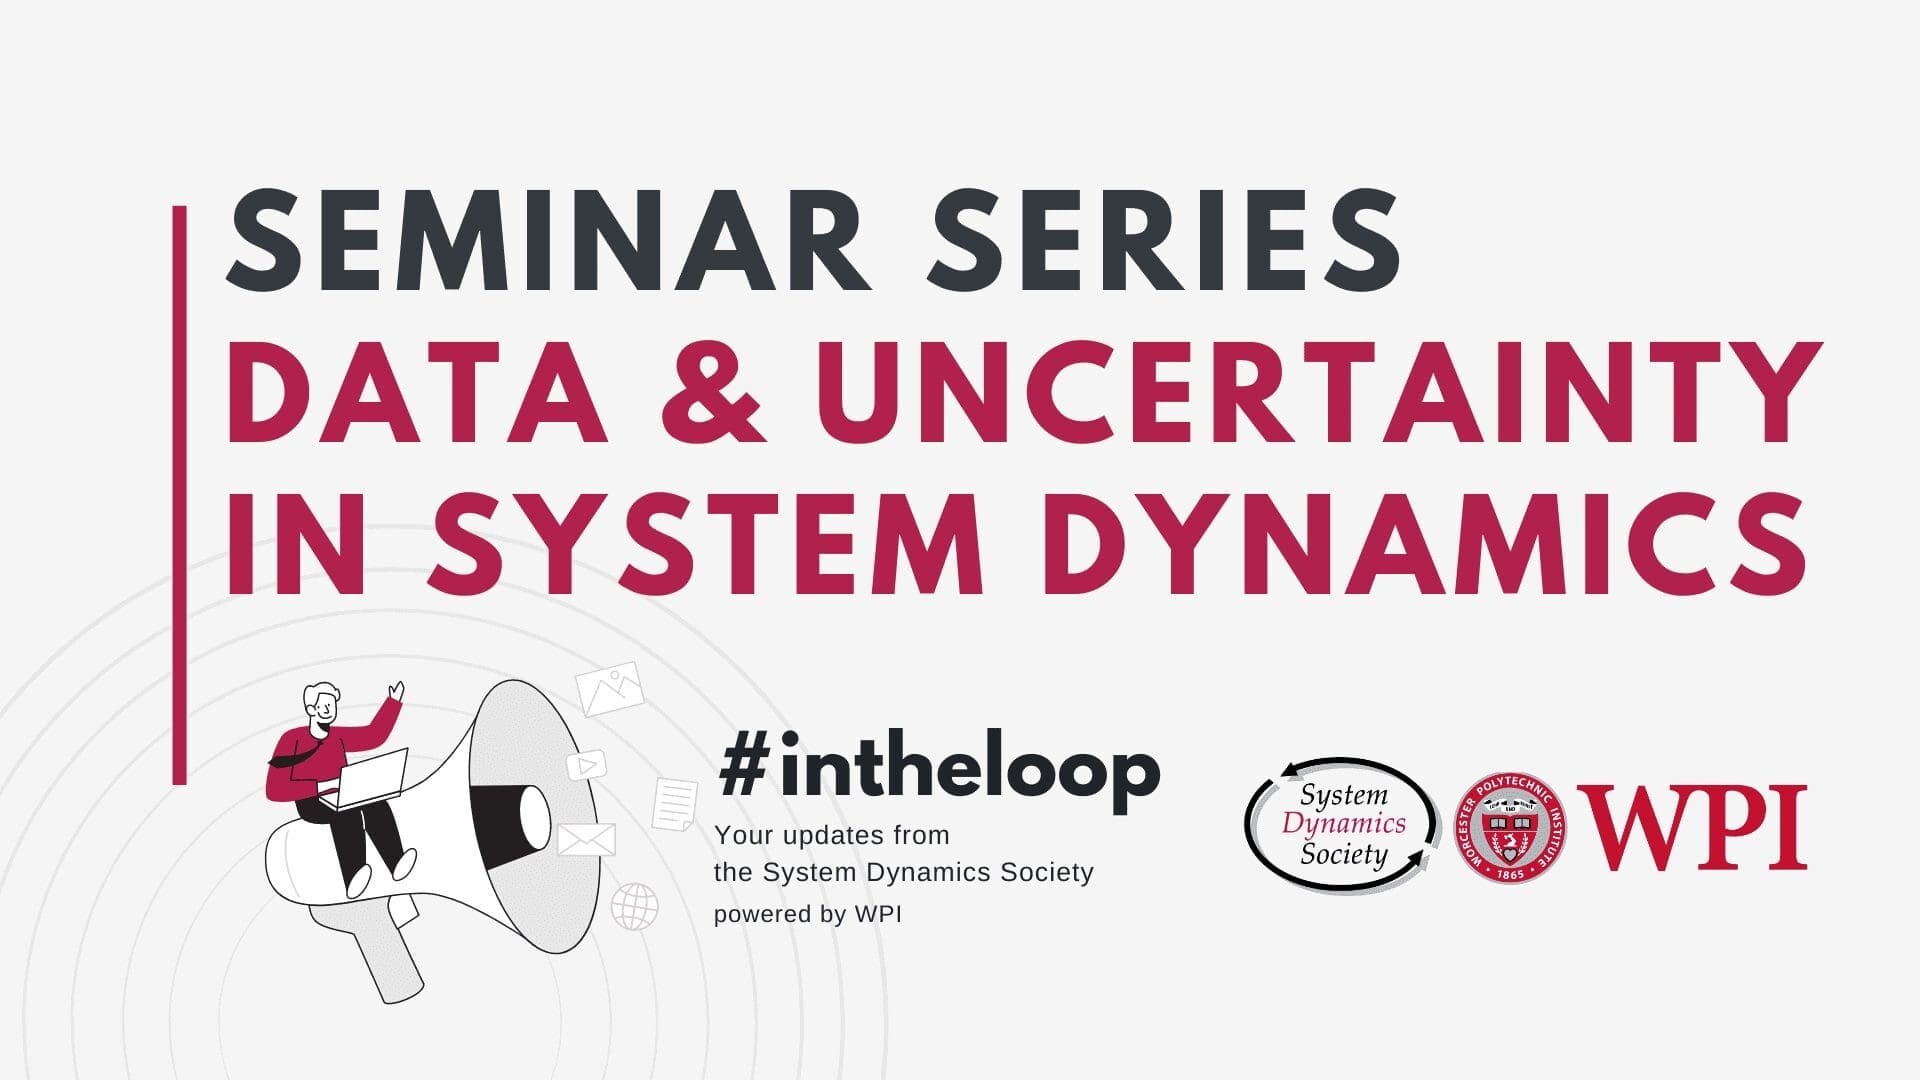 Seminar Series: Data & Uncertainty in System Dynamics #intheloop